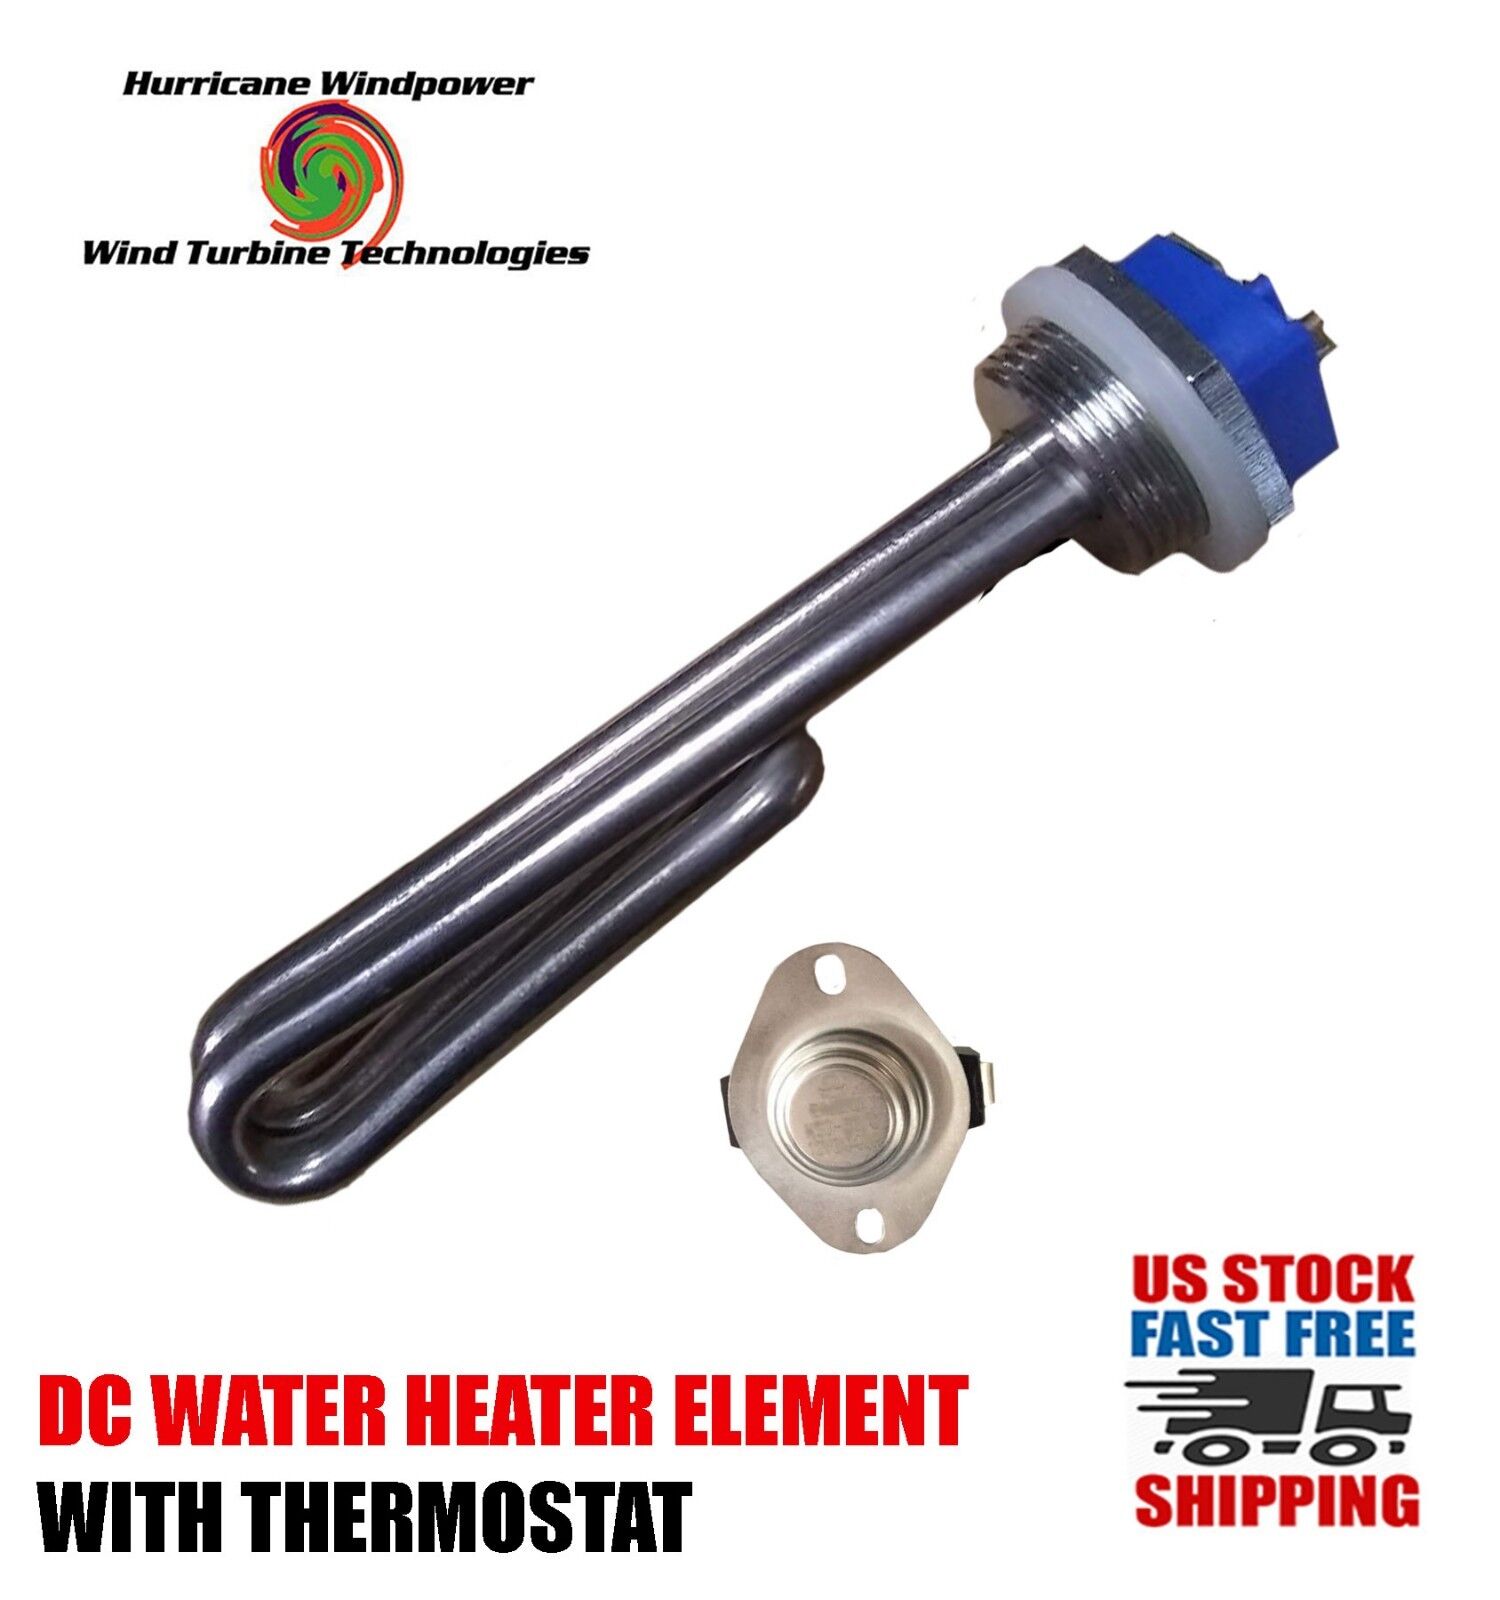 DC Water Heater Element 48 Volt 1000 Watt with Thermostat 140 Degrees F